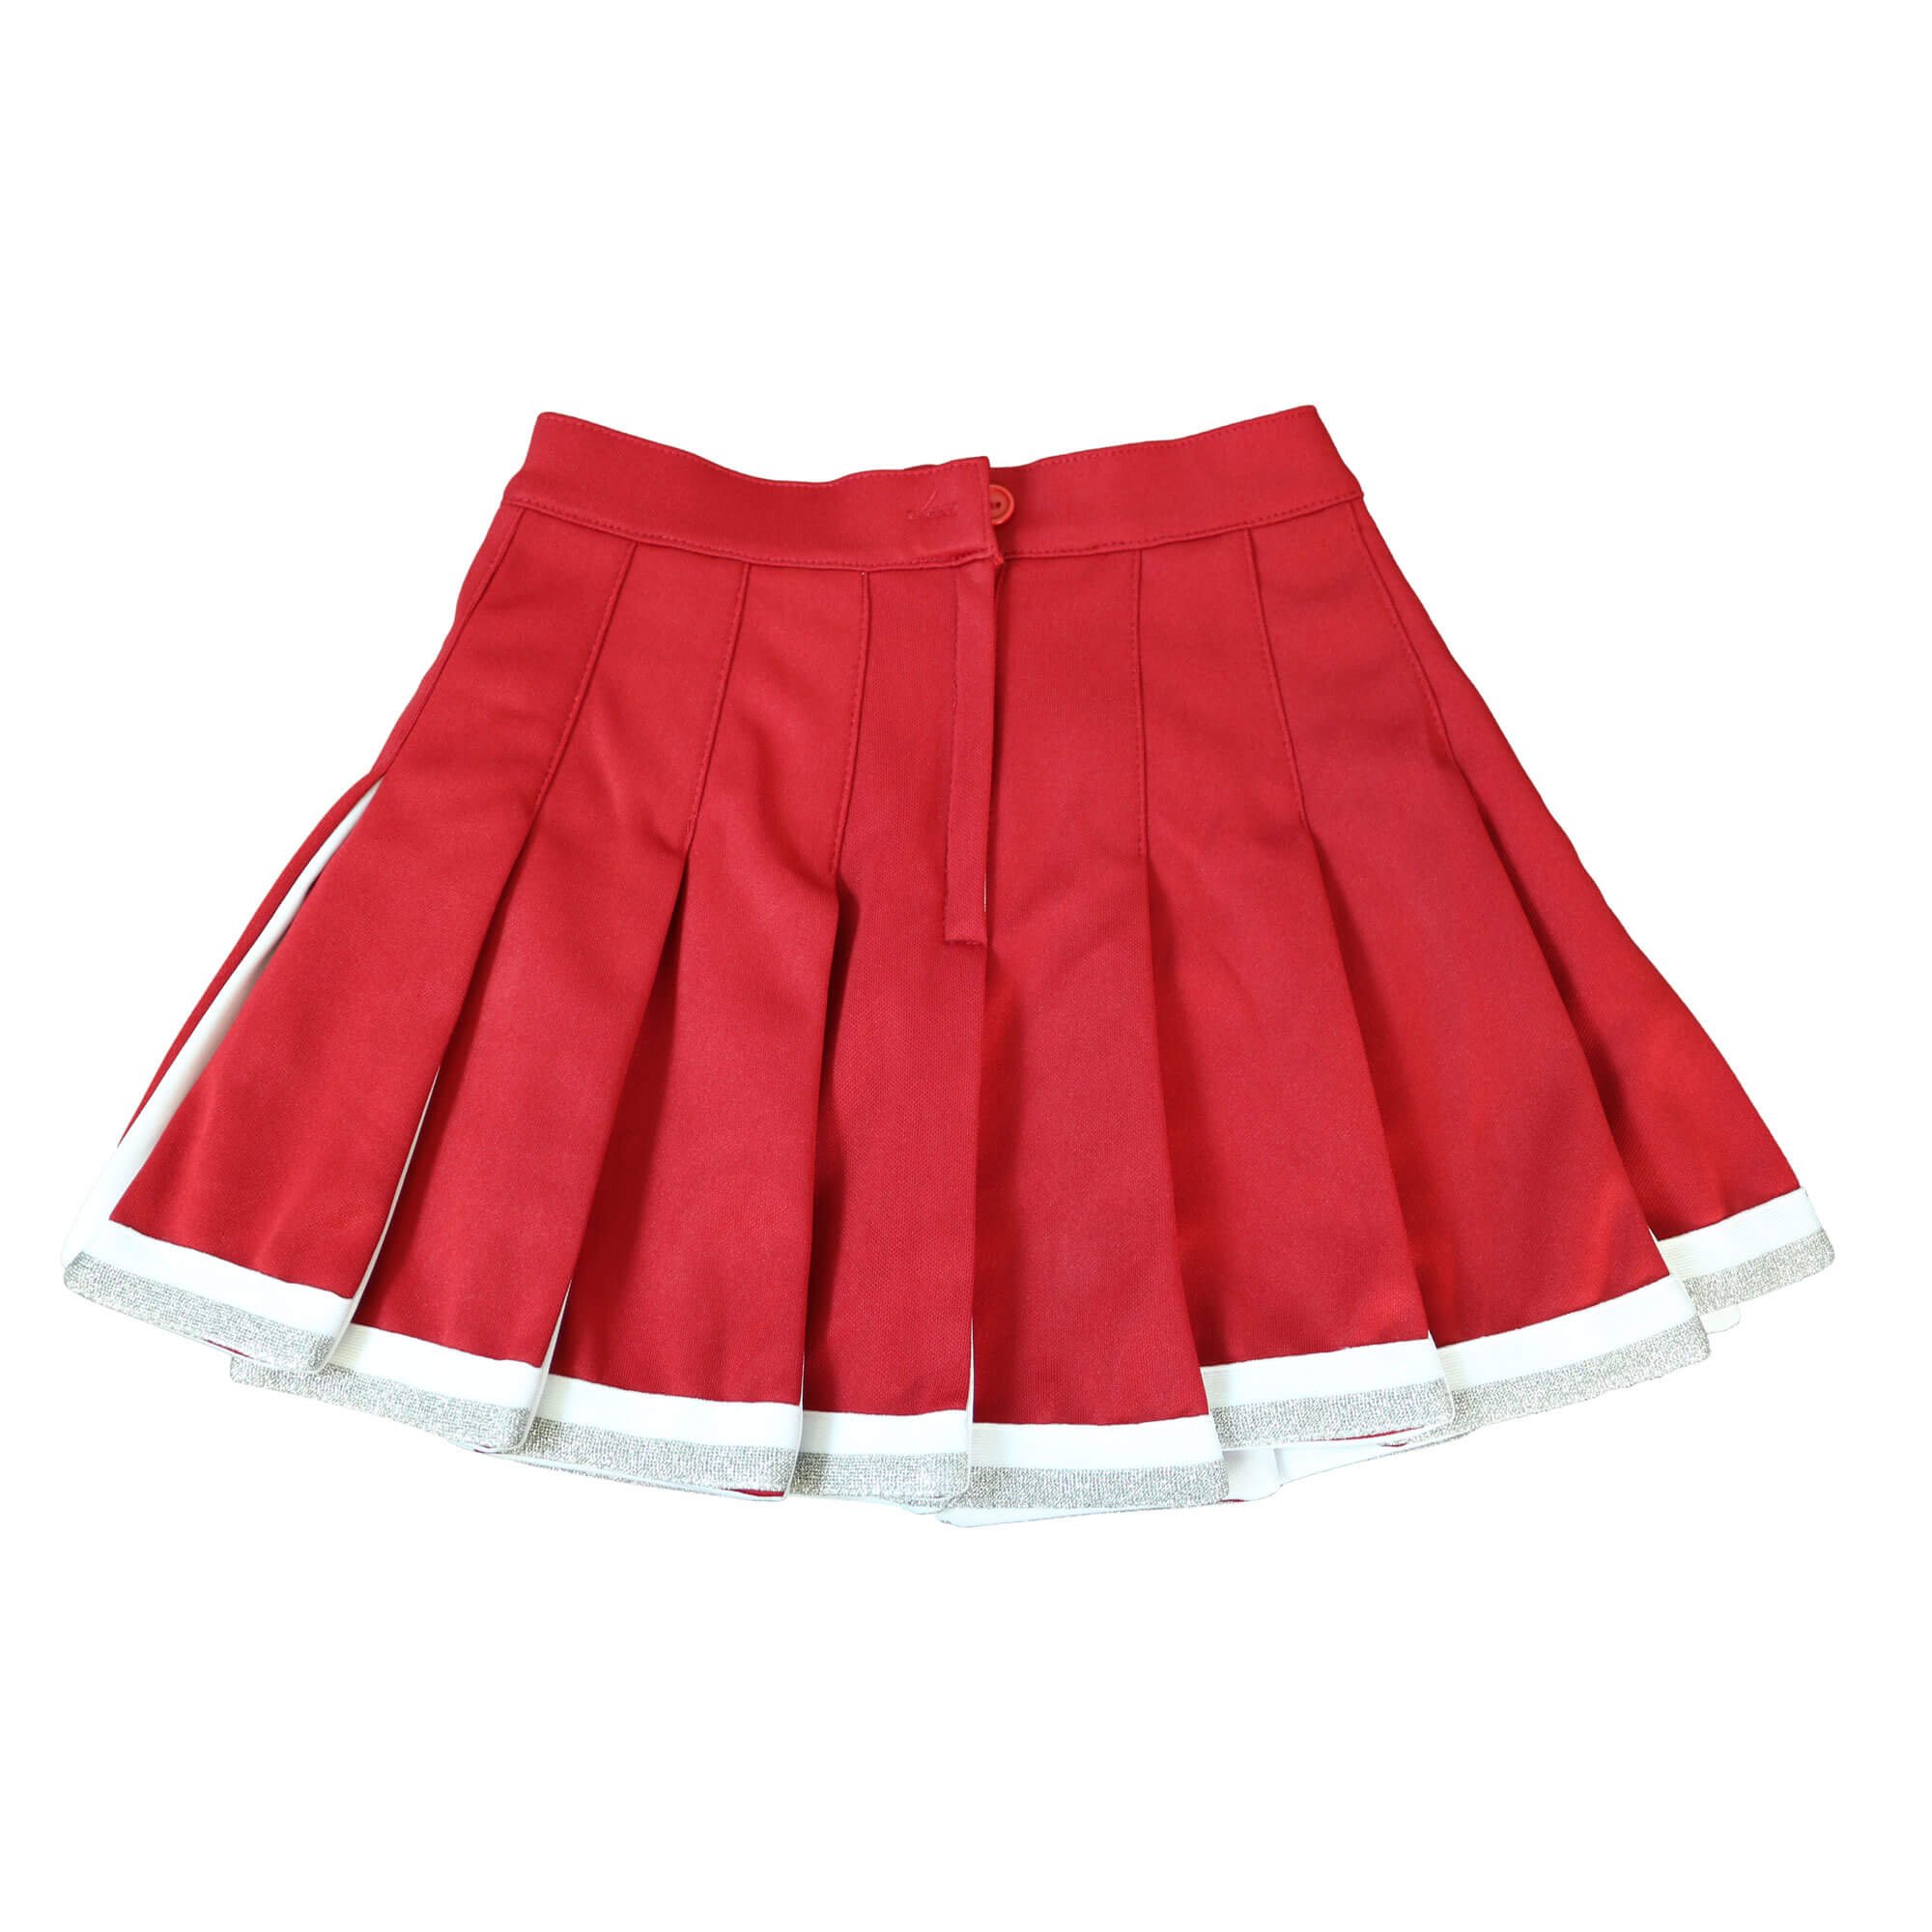 Danzcue Child Cheerleading Pleated Skirt - Click Image to Close